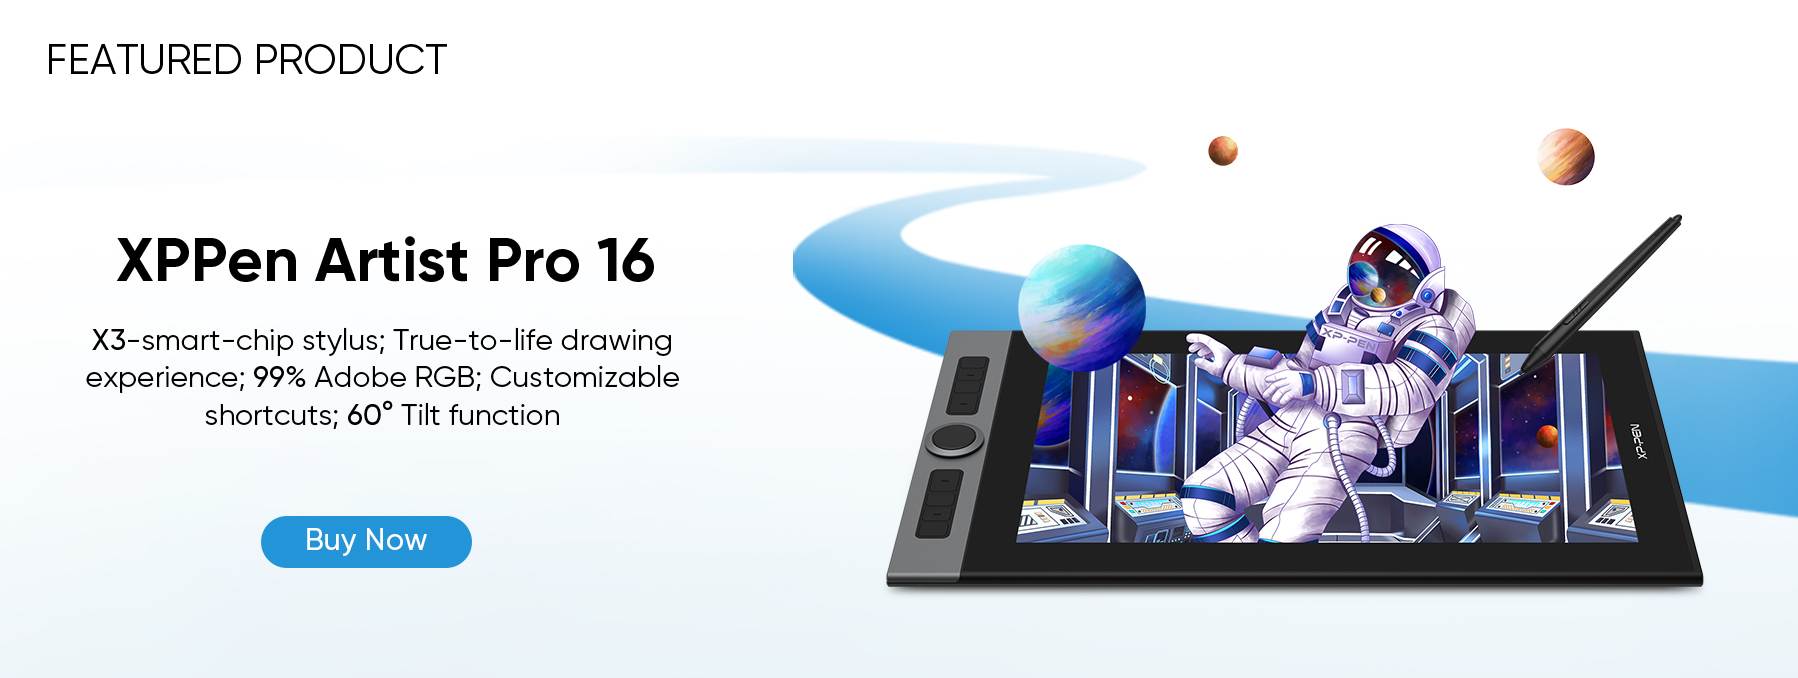 XPPen Artist Pro 16 display drawing tablet for architecture